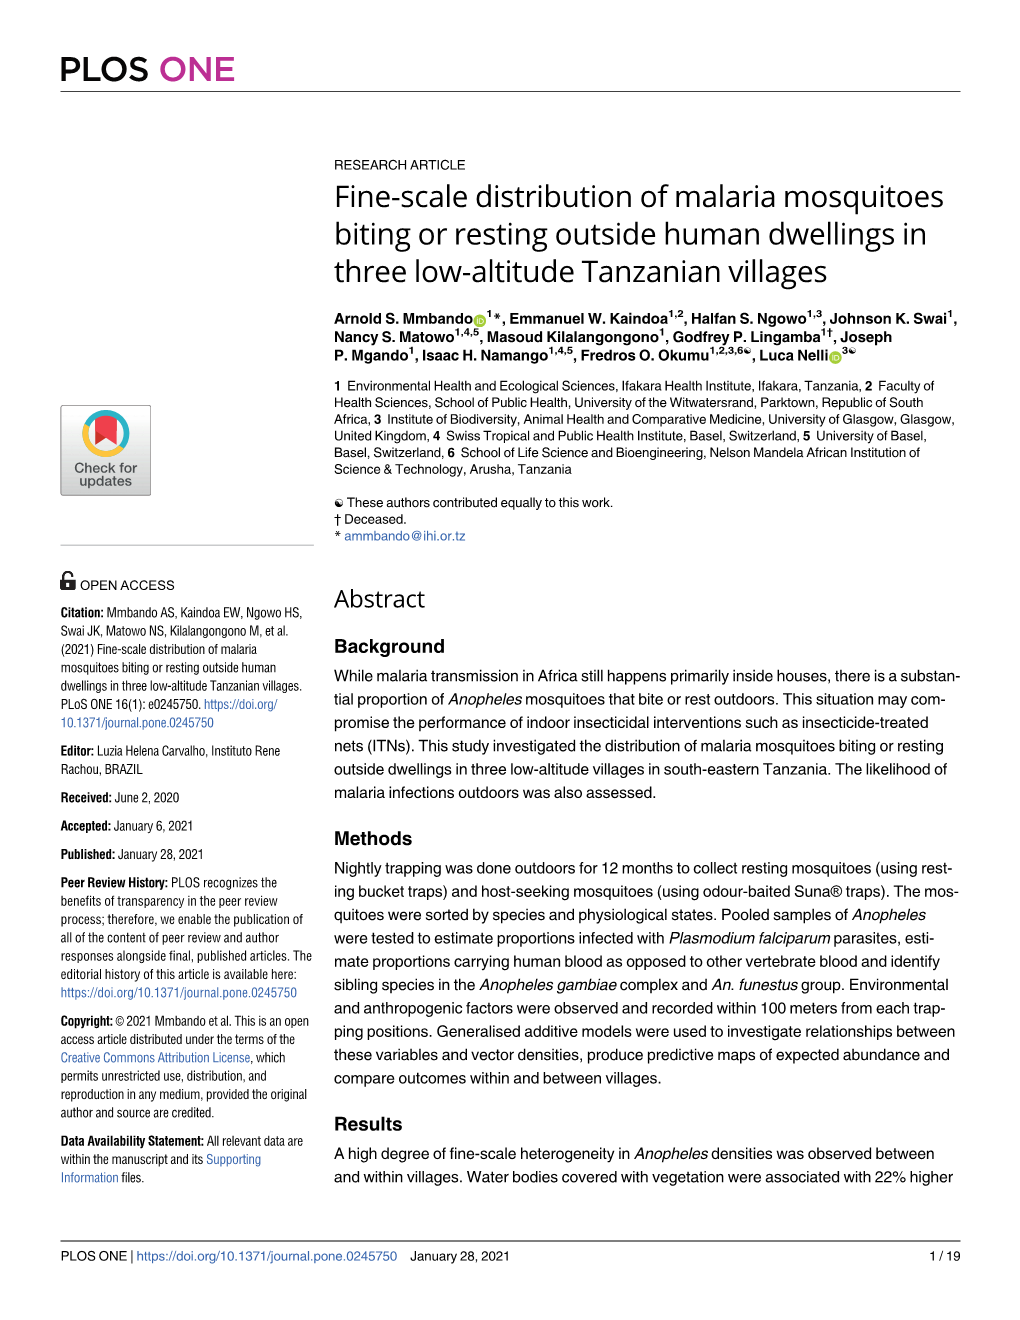 Fine-Scale Distribution of Malaria Mosquitoes Biting Or Resting Outside Human Dwellings in Three Low-Altitude Tanzanian Villages